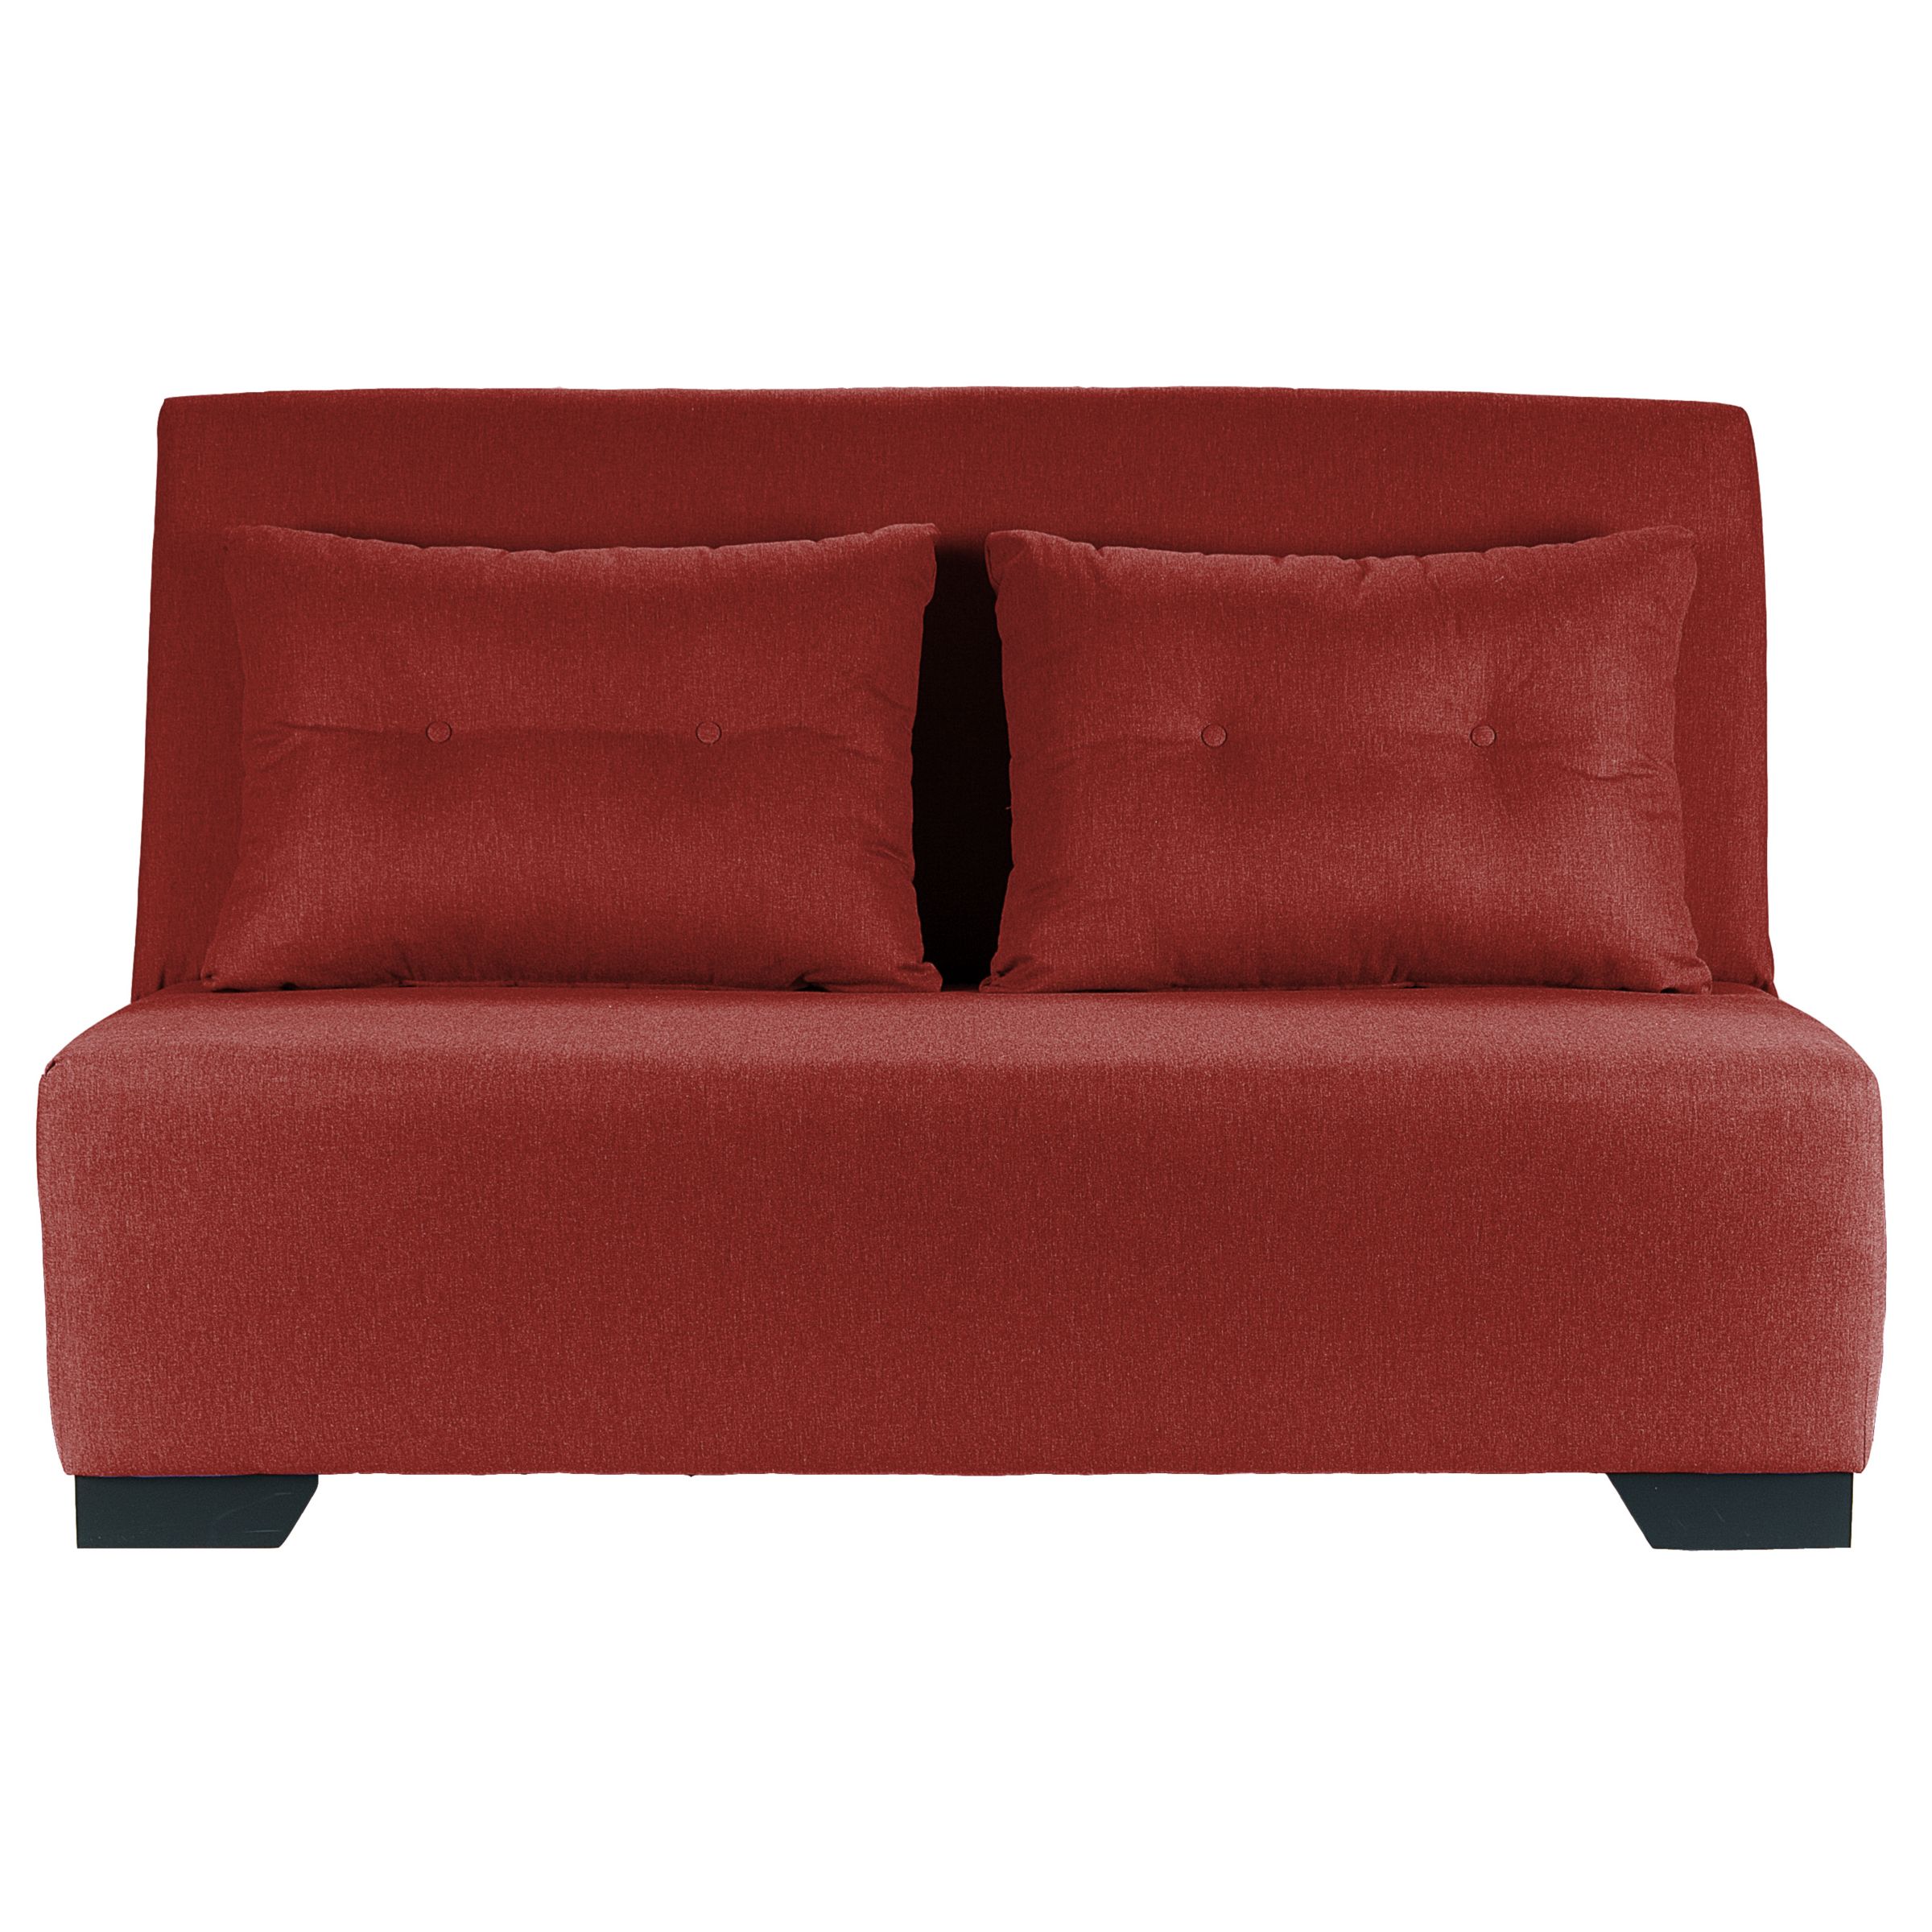 John Lewis Puccini Large Sofa Bed, Rouge, width 140cm